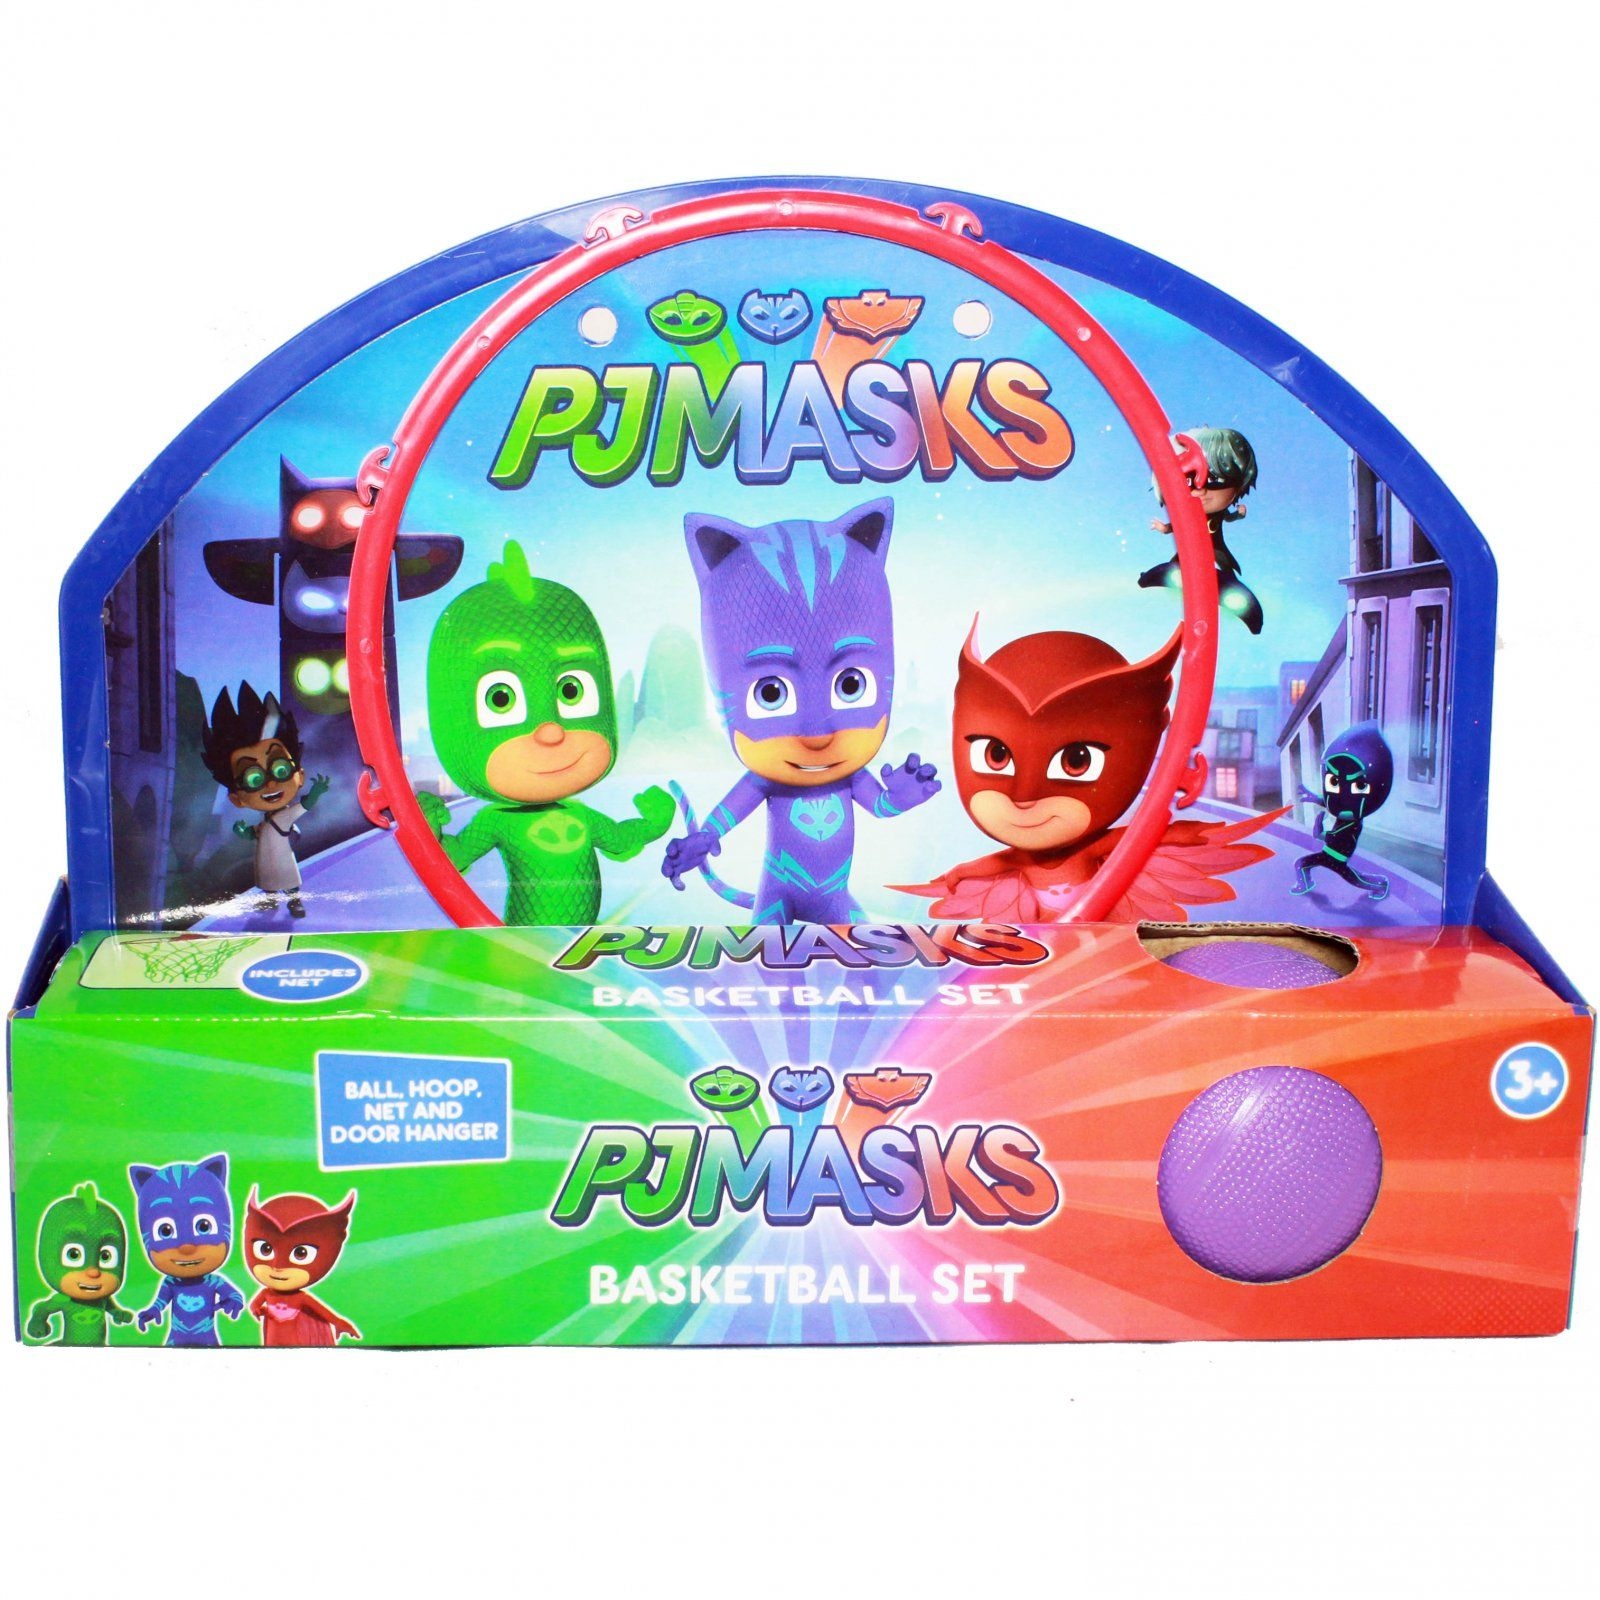 Extraordinary Pj Masks Bedroom Decor Within Girls Chic - Action Figure , HD Wallpaper & Backgrounds